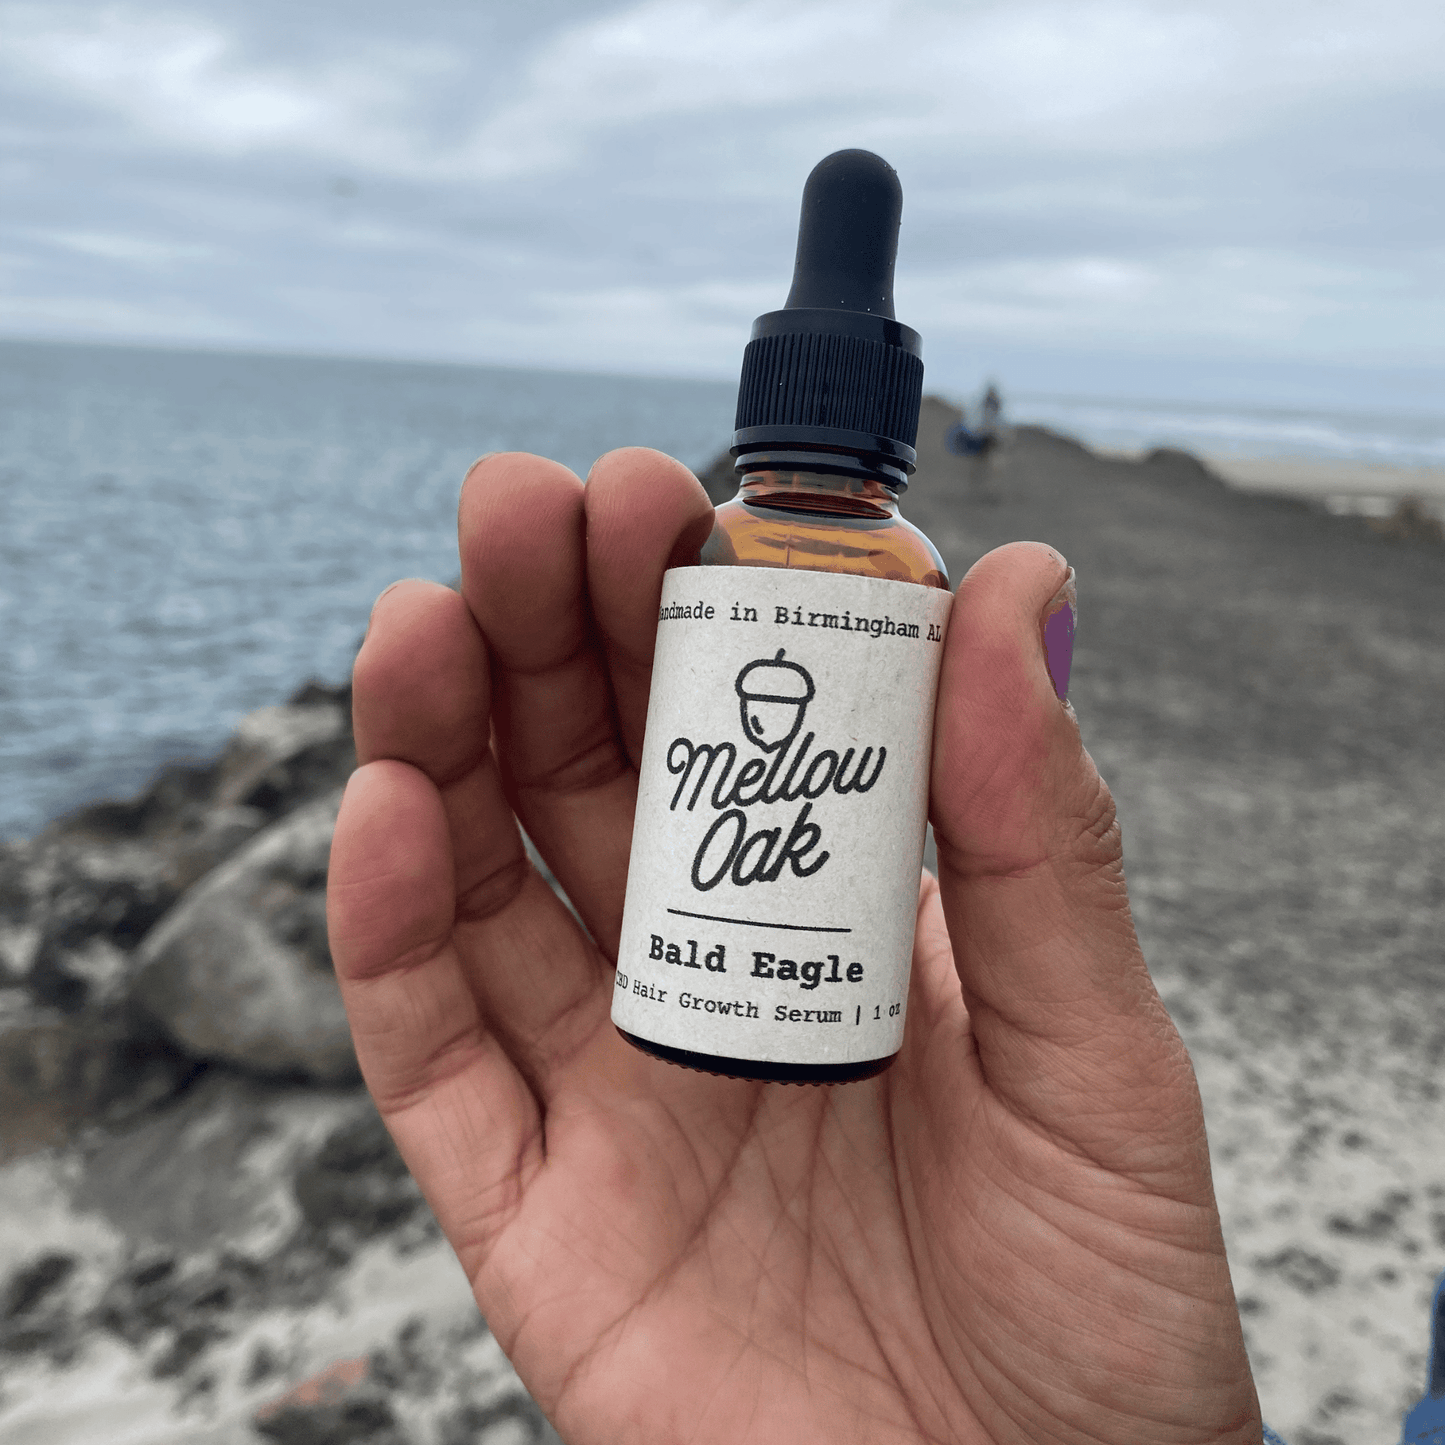 Woman holding Bald Eagle CBD Hair Growth Serum by the water